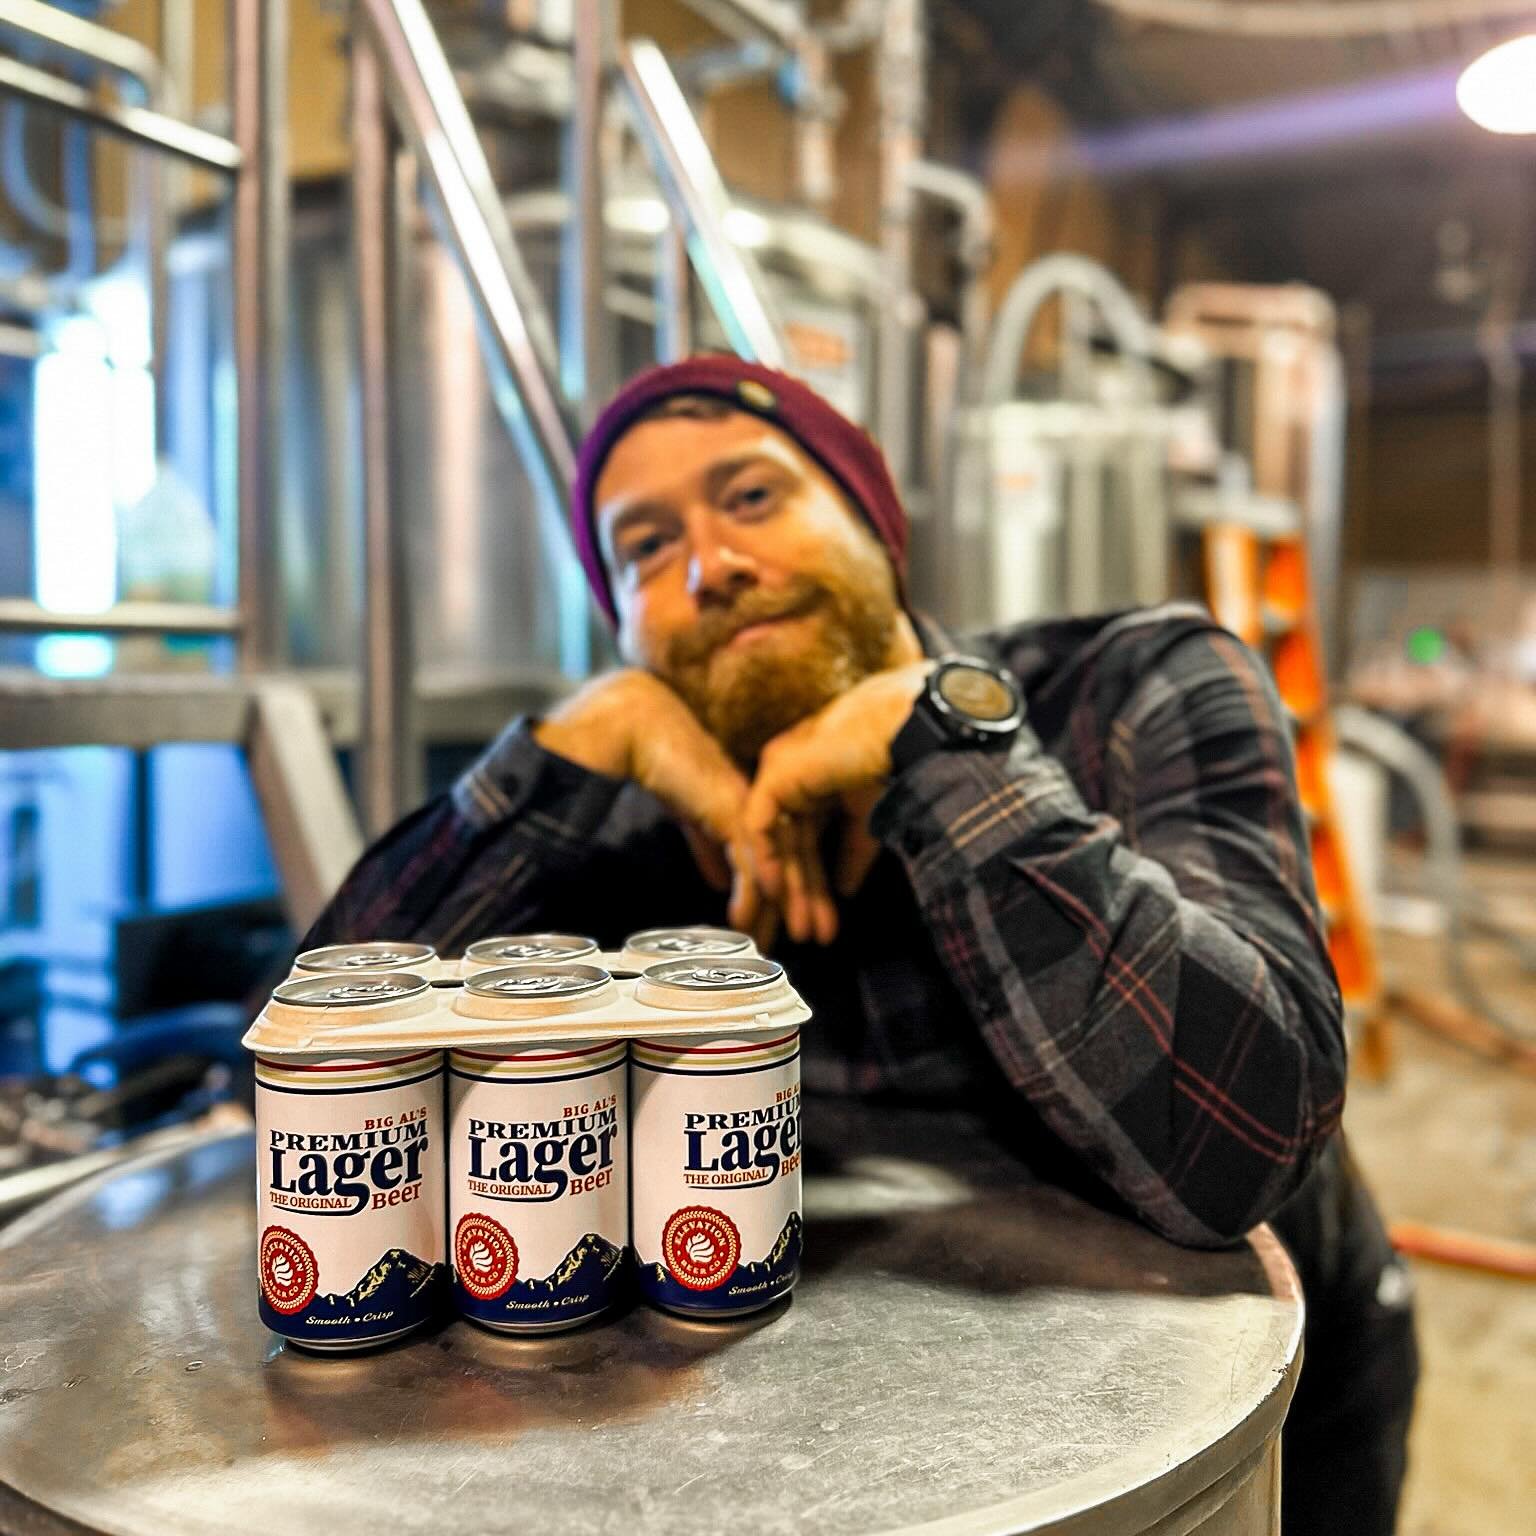 Cheers to #AmericanCraftBeerWeek 🍻 We asked our head brewer Alan what he&rsquo;s sippin&rsquo; on to commemorate the official start of beer season&hellip;&rdquo;Big Al&rsquo;s Premium Lager, of course! It&rsquo;s the original beer, after all.&rdquo;